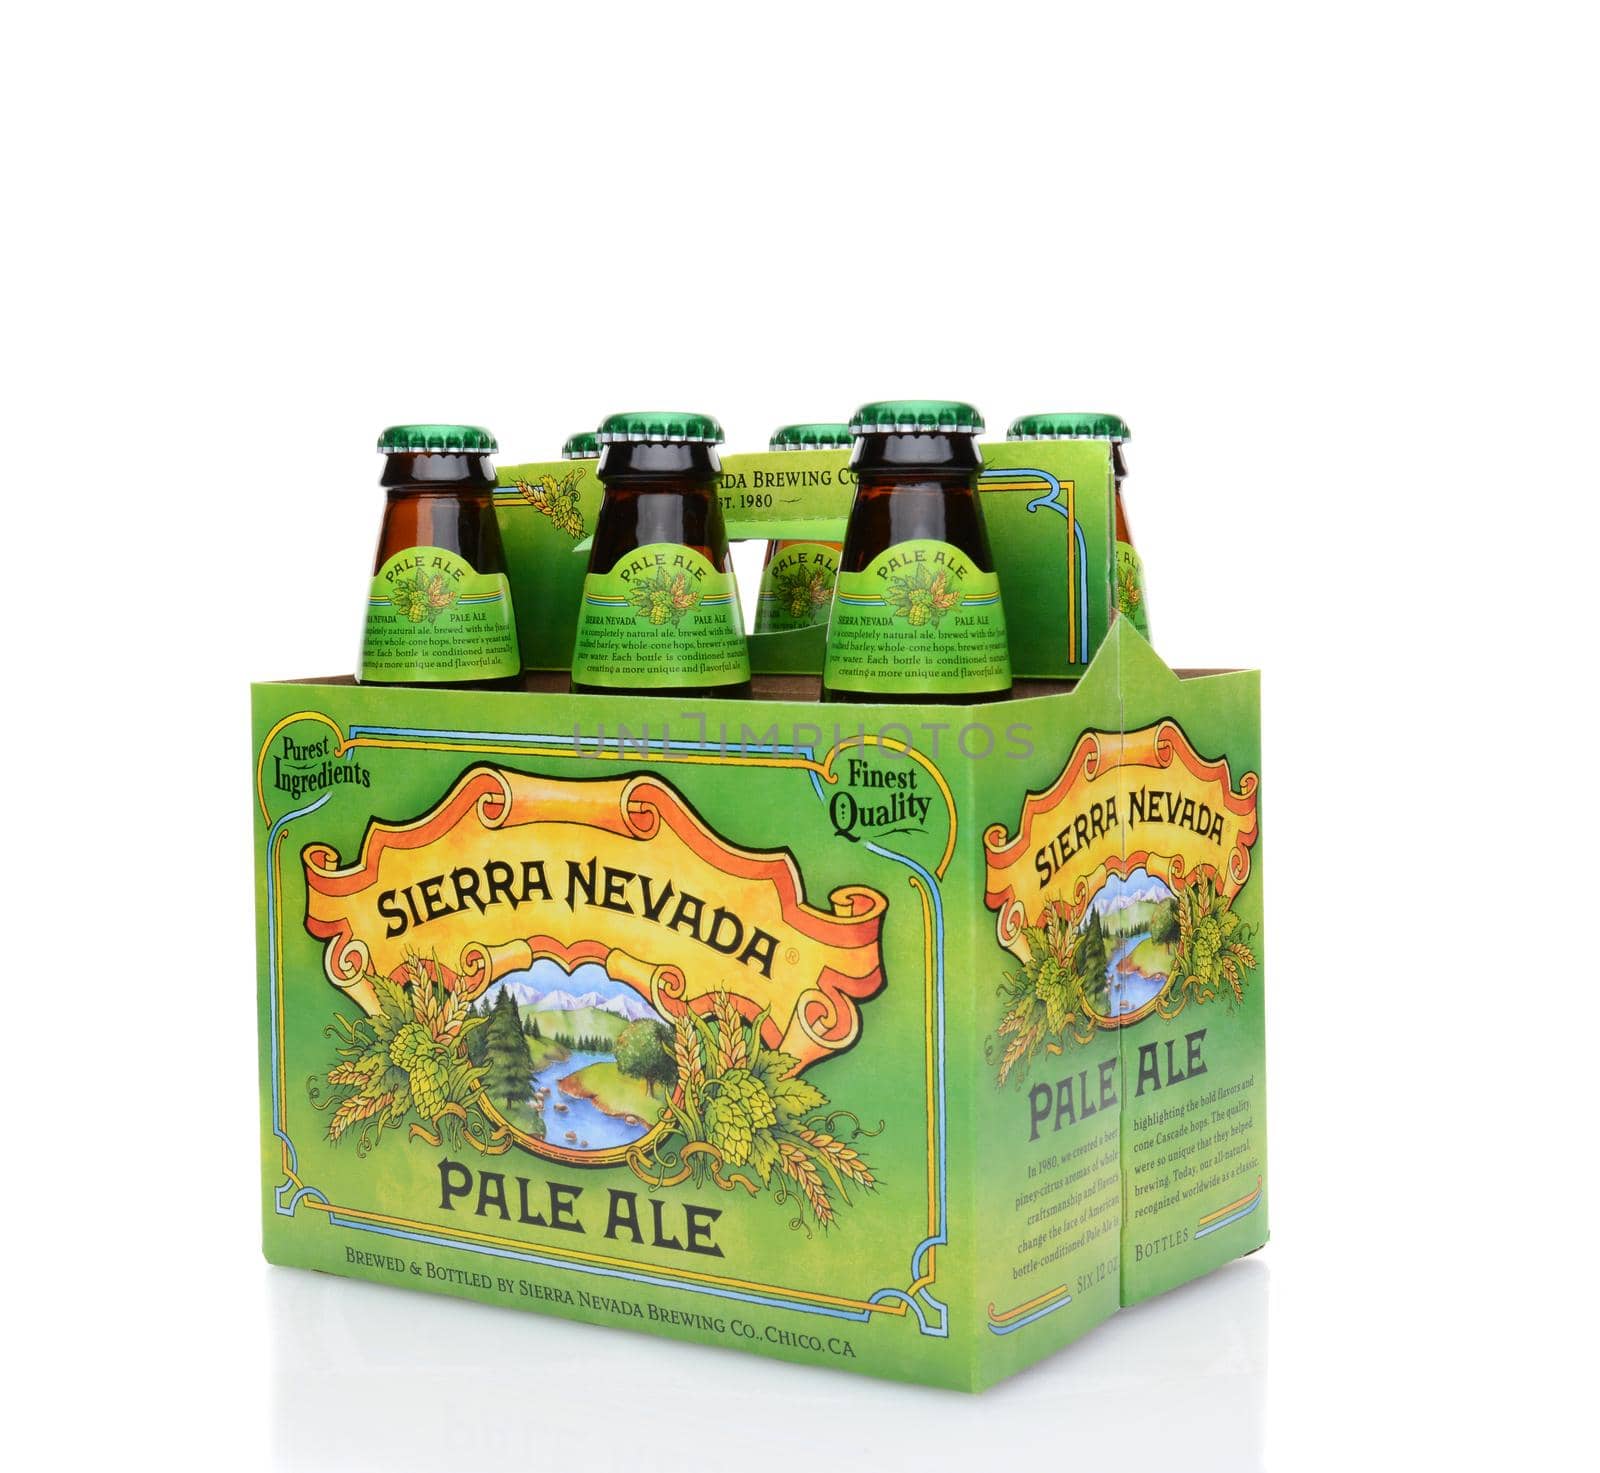 IRVINE, CA - MAY 25, 2014: A 3/4 view of a 6 pack of Sierra Nevada Pale Ale. Sierra Nevada Brewing Co. was established in 1980 by homebrewers in Chico, California,